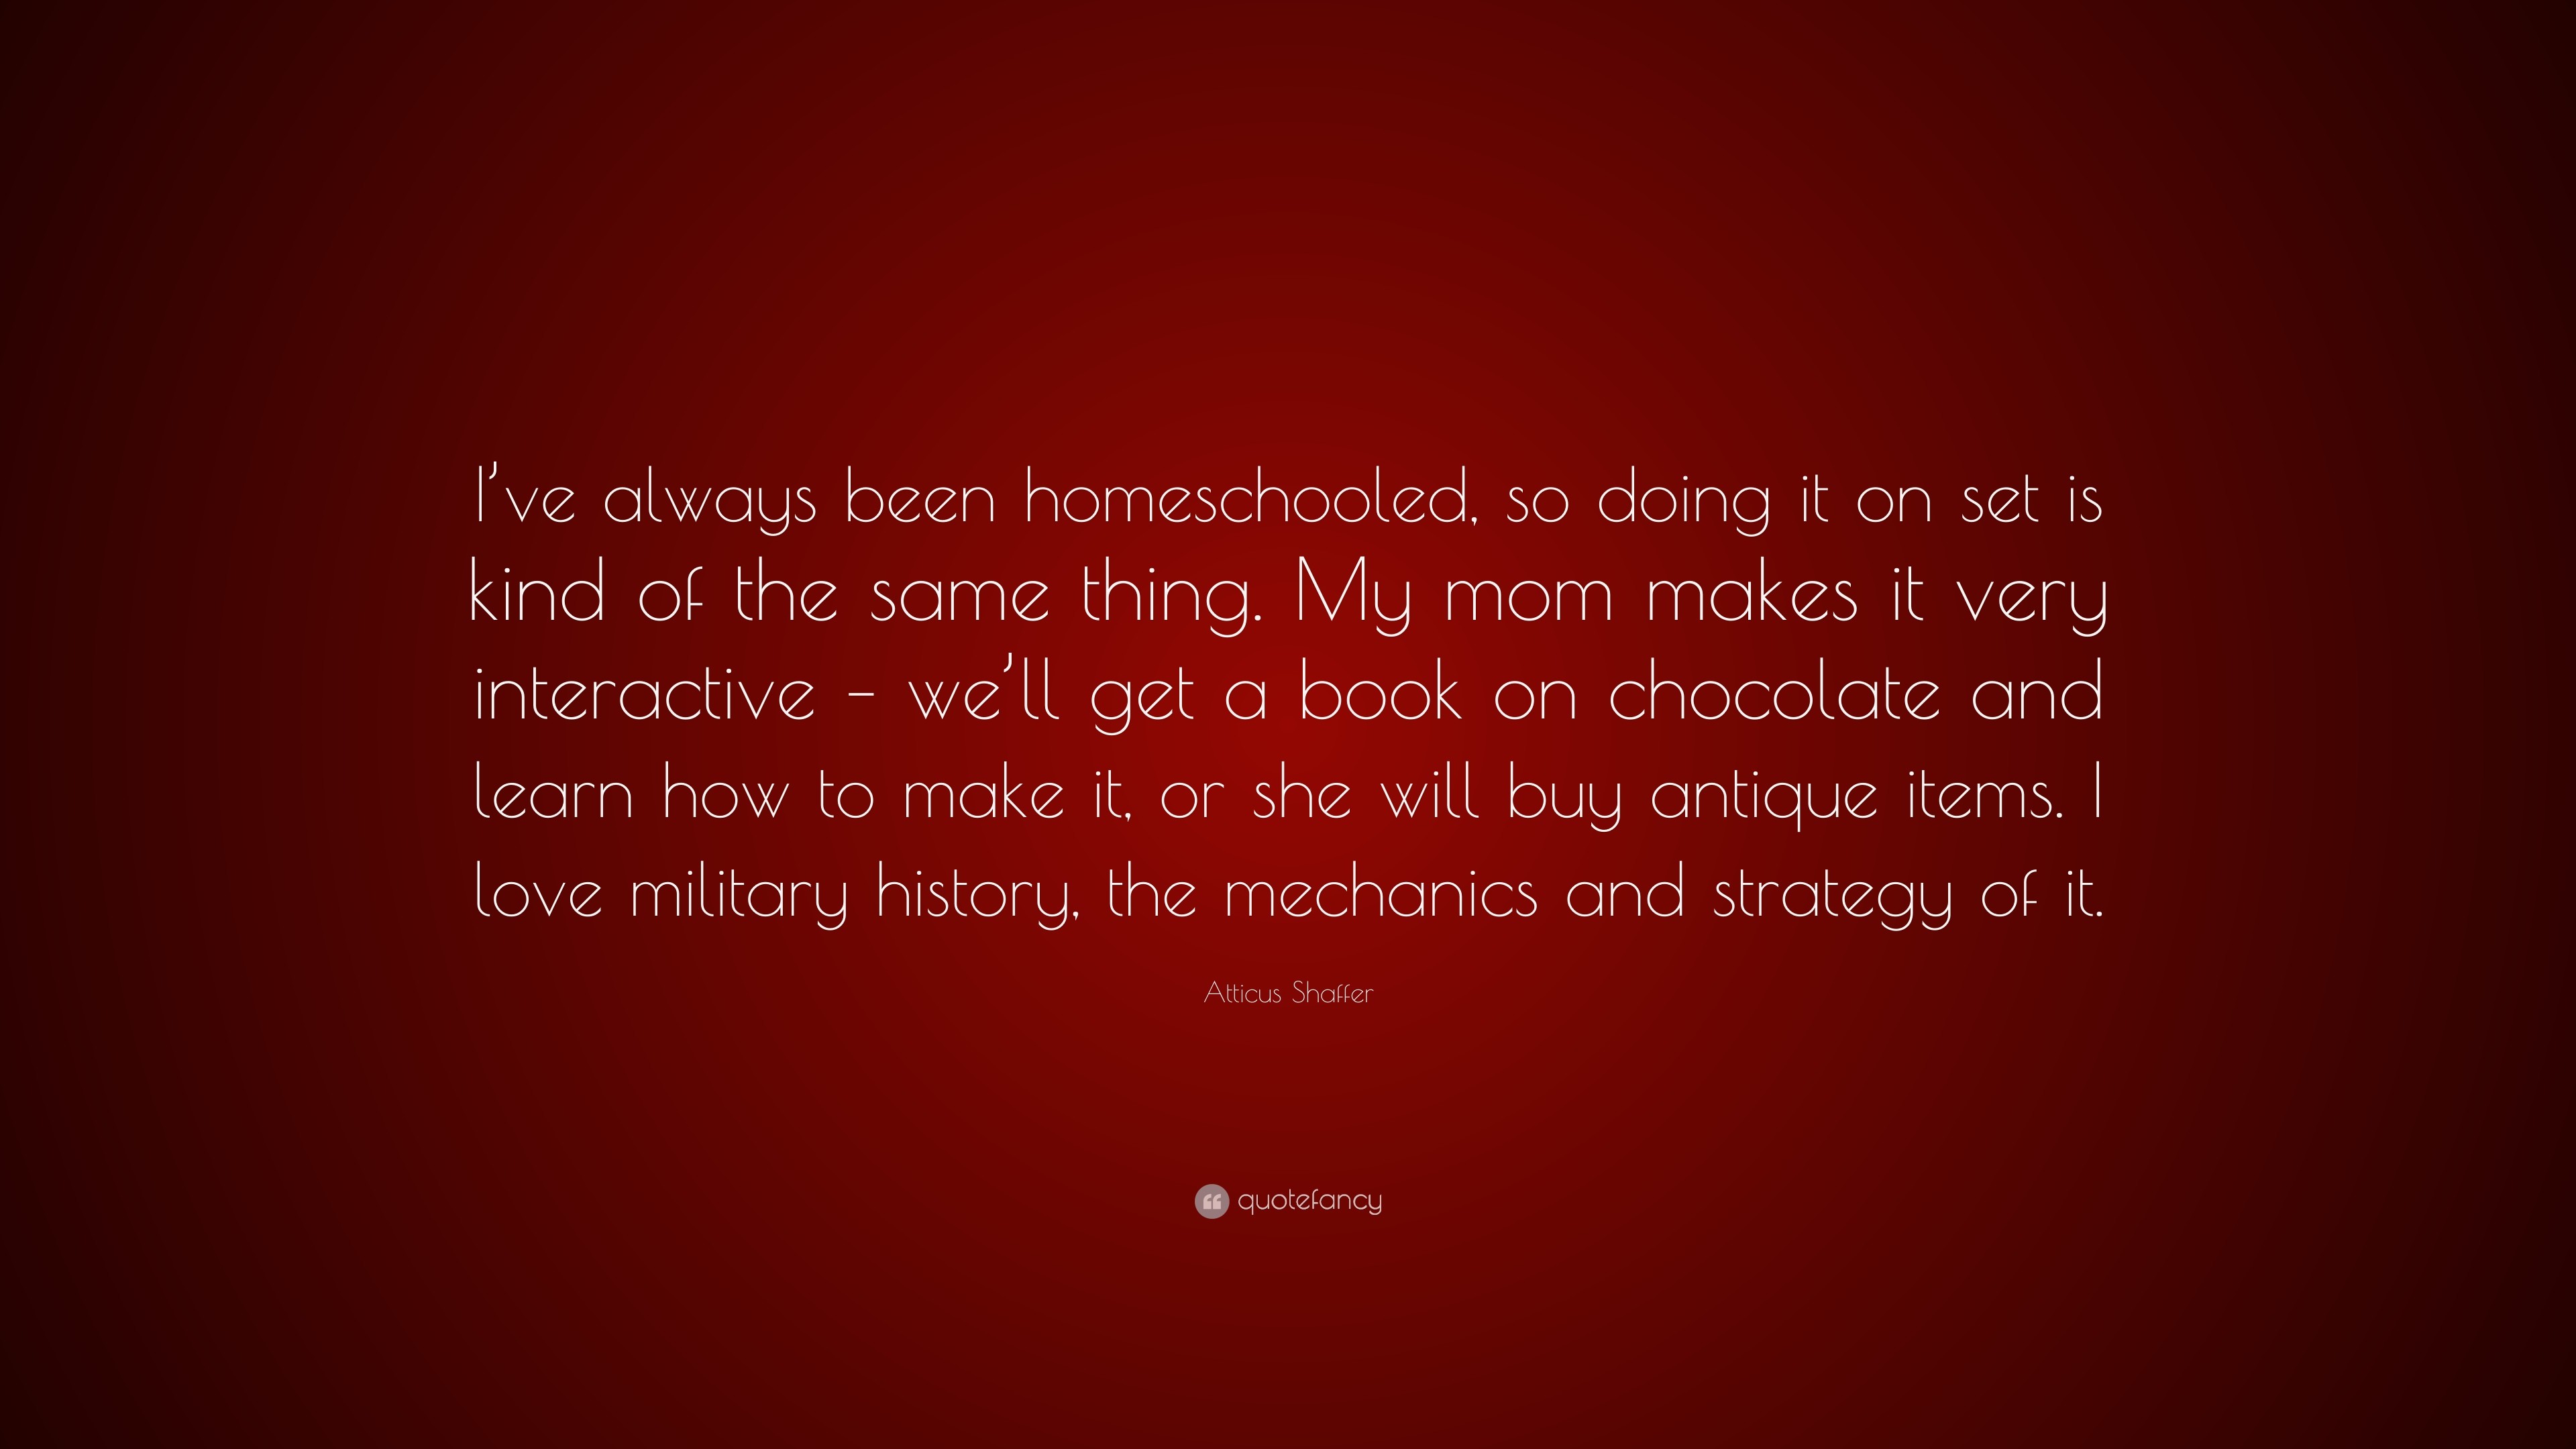 3840x2160 Atticus Shaffer Quote: “I've always been homeschooled, so doing it on